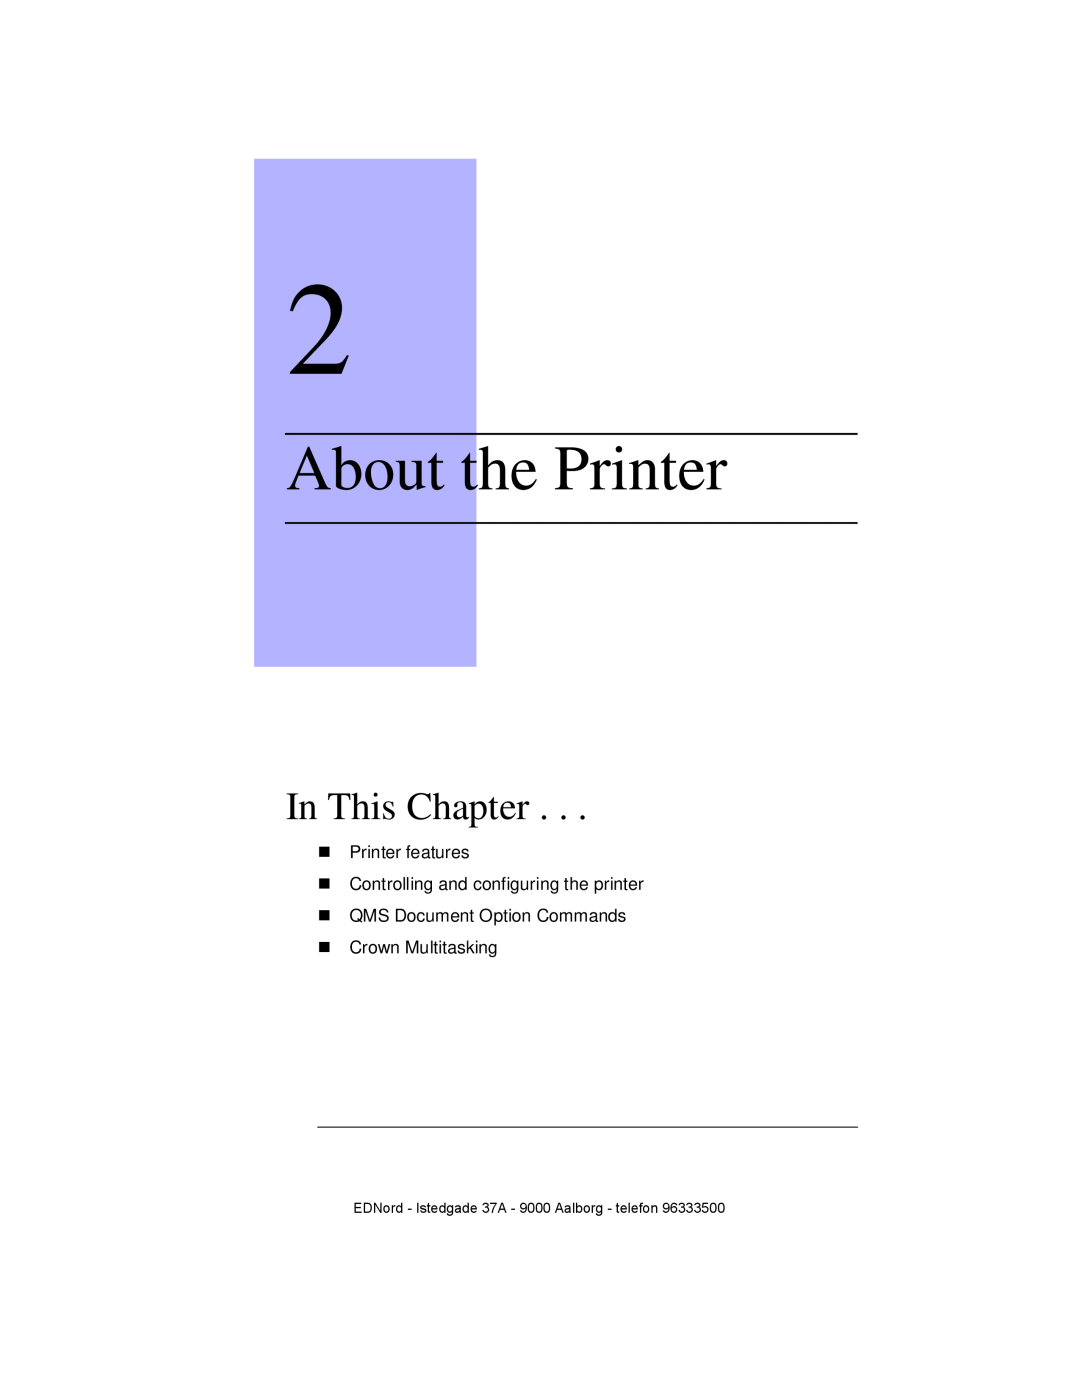 IBM QMS 4525 manual About the Printer, In This Chapter, „ Printer features „ Controlling and configuring the printer 